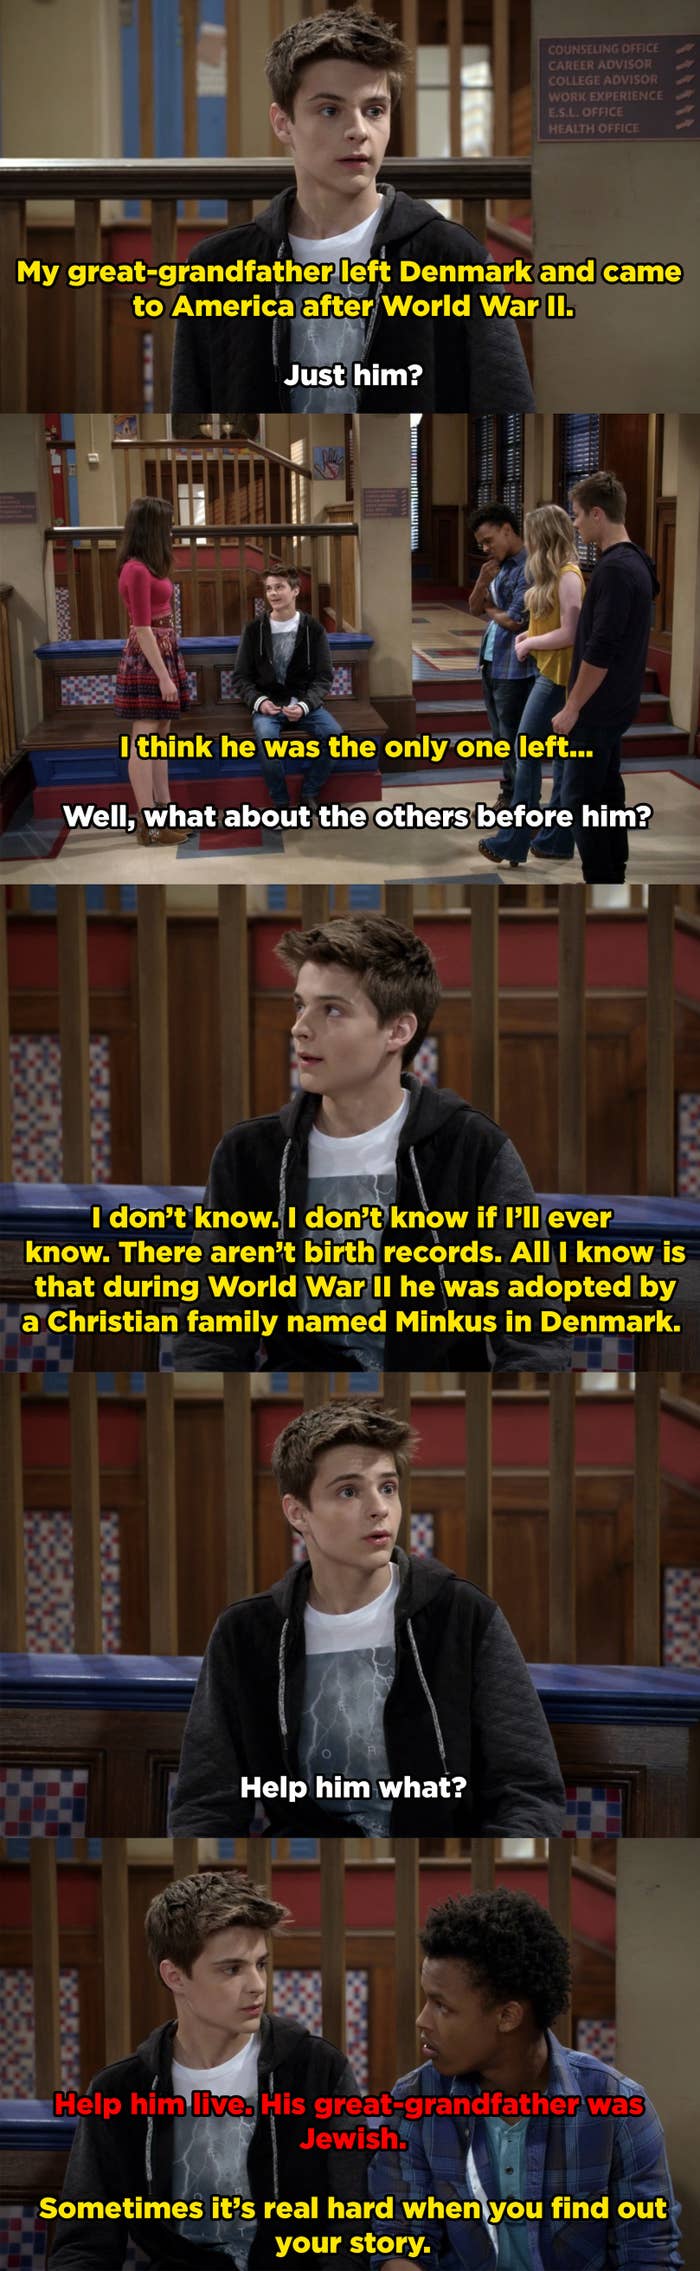 Farkle explains to his friends that his great-grandfather was adopted after World War II because the rest of his ancestors were Jewish and killed during the Holocaust.